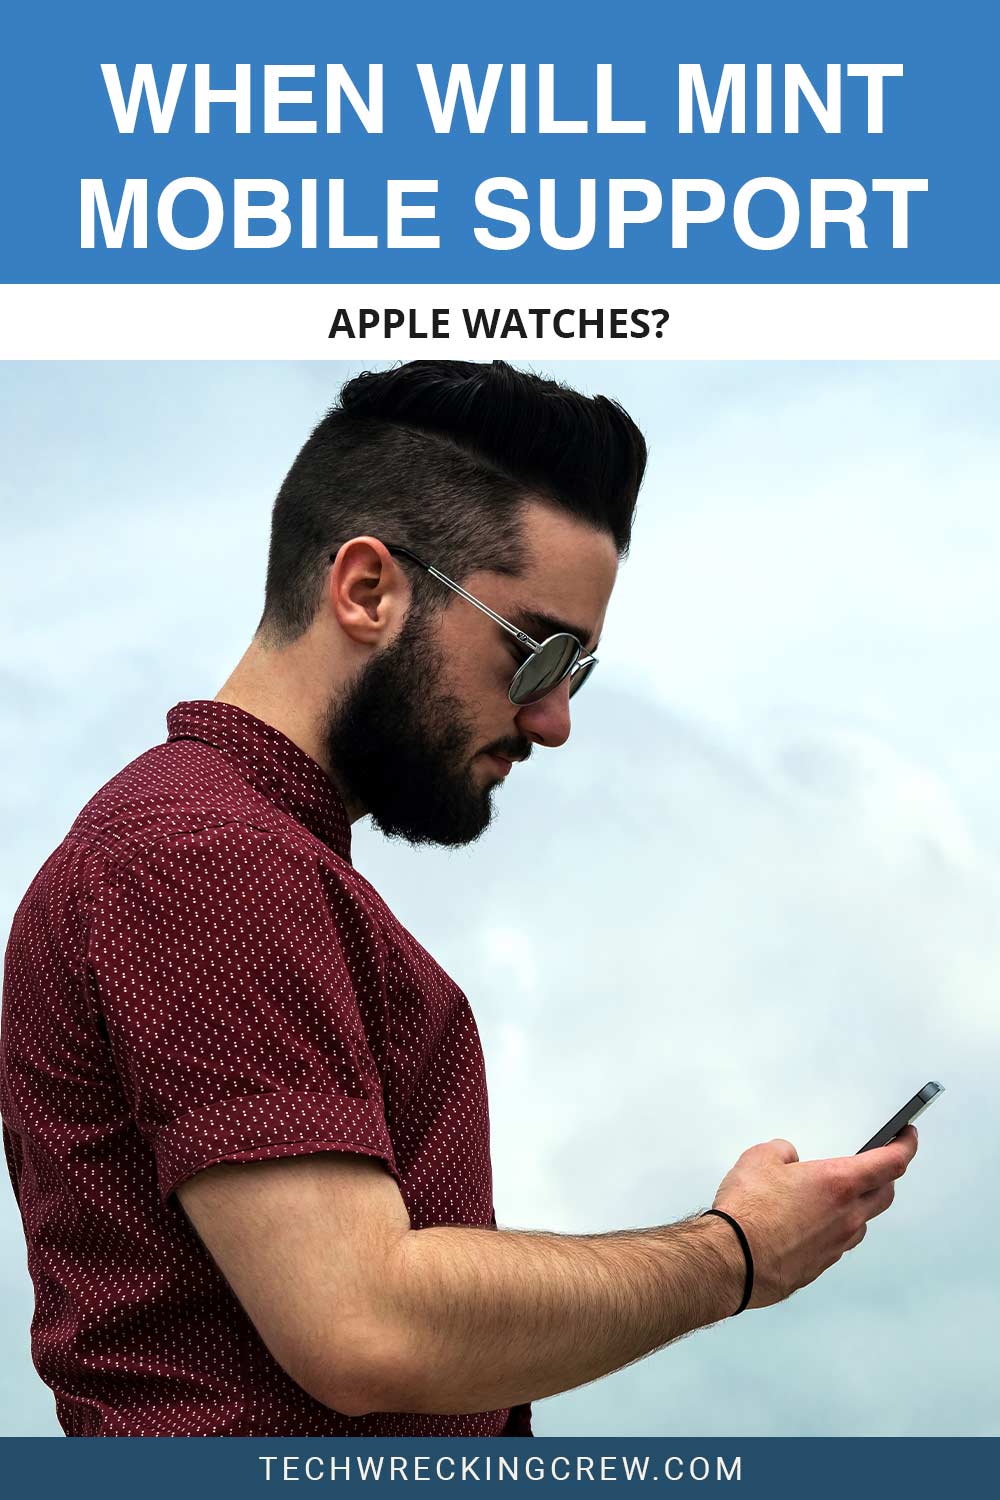 When will Mint Mobile support Apple Watches?